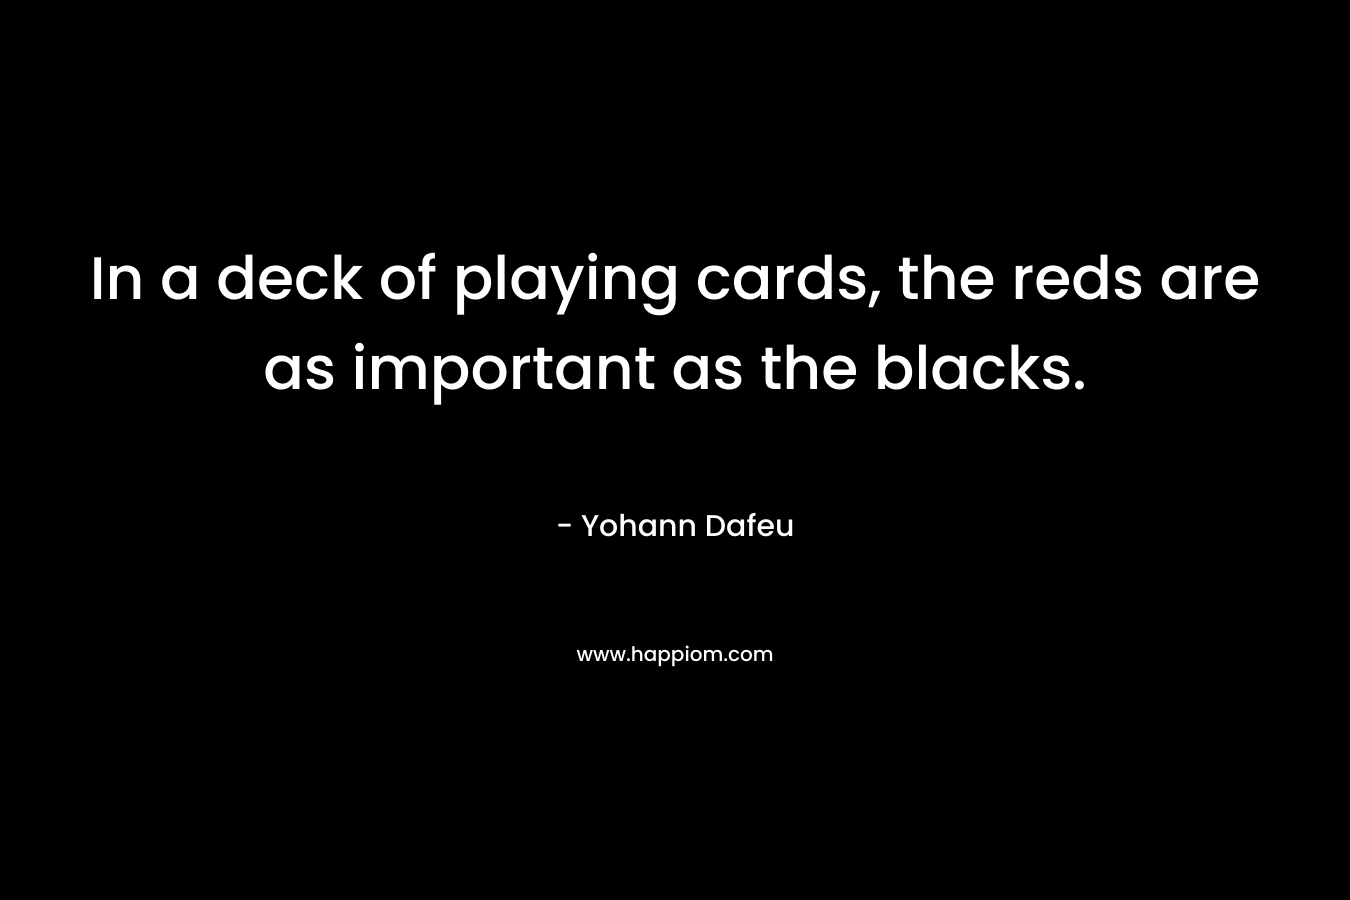 In a deck of playing cards, the reds are as important as the blacks.